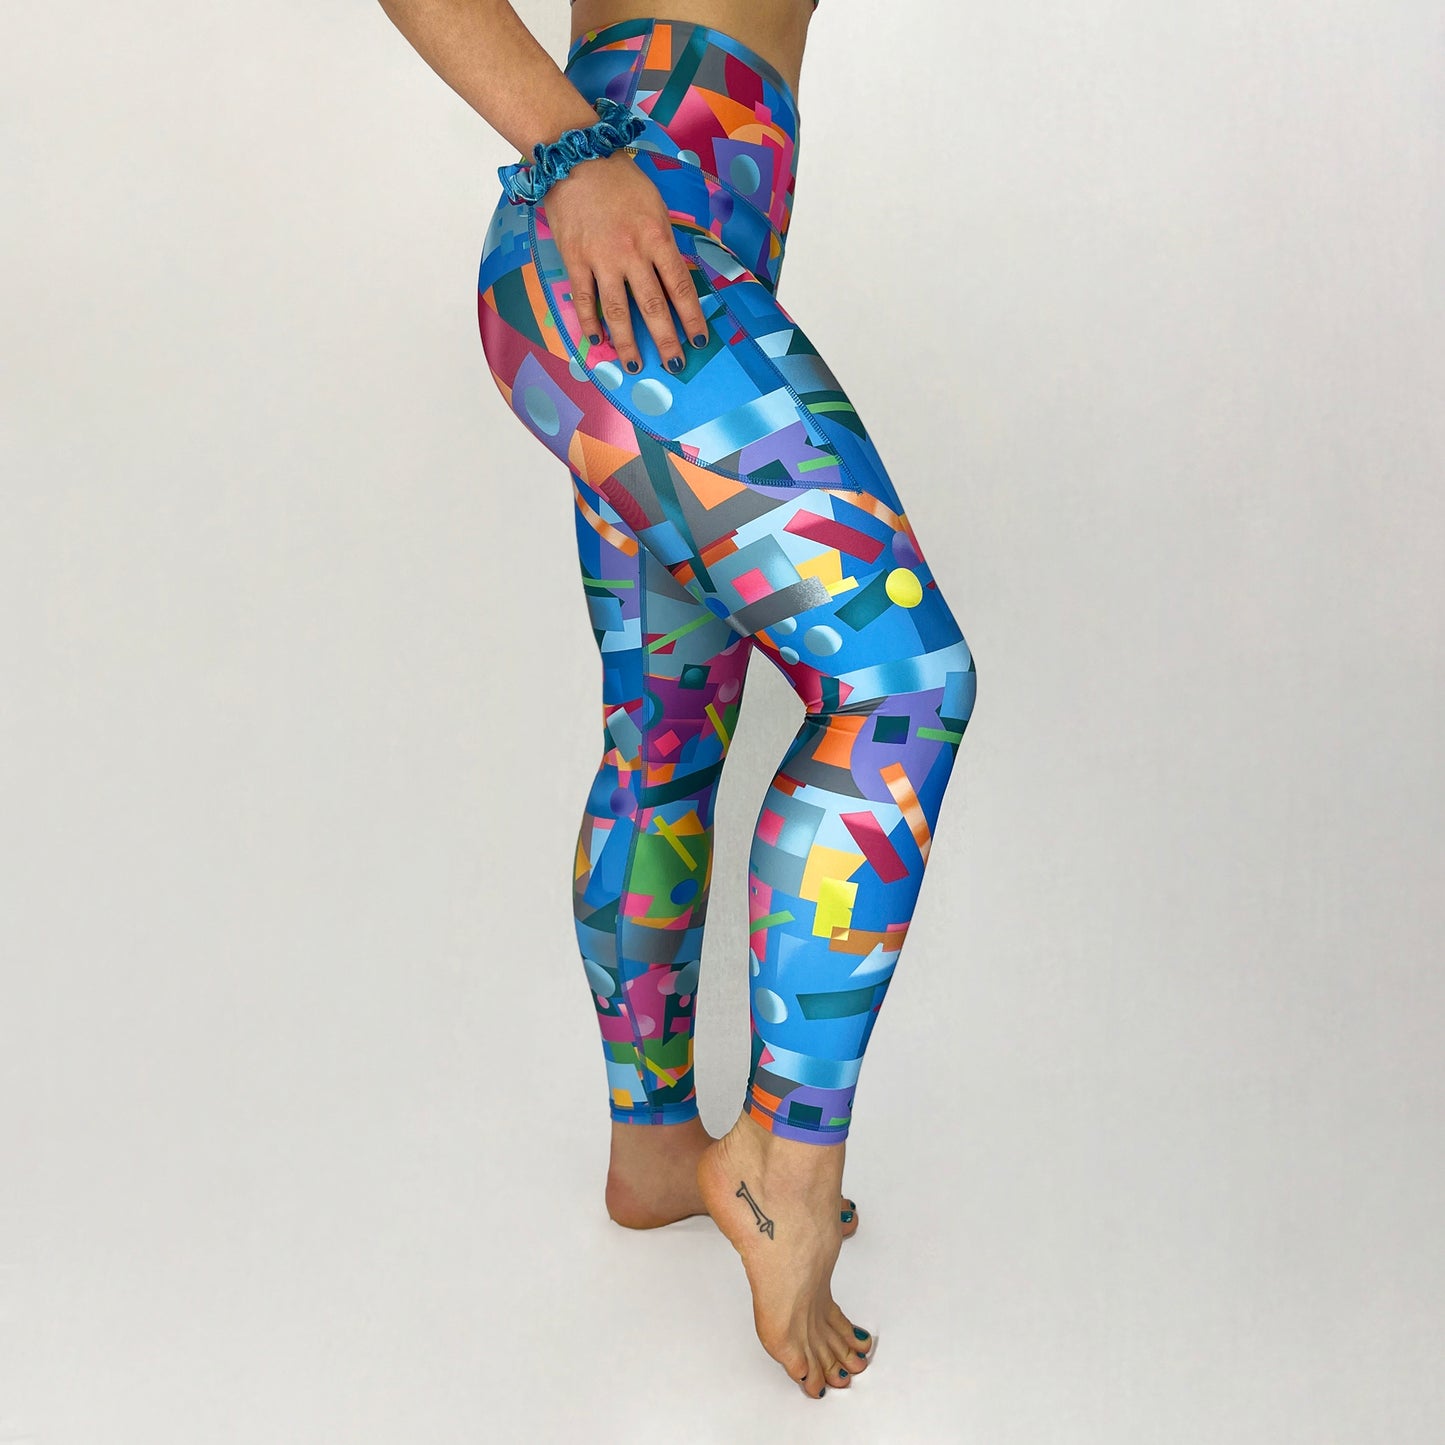 colourful high rise leggings with pockets made sustainably from recycled materials - geometric - side pocket